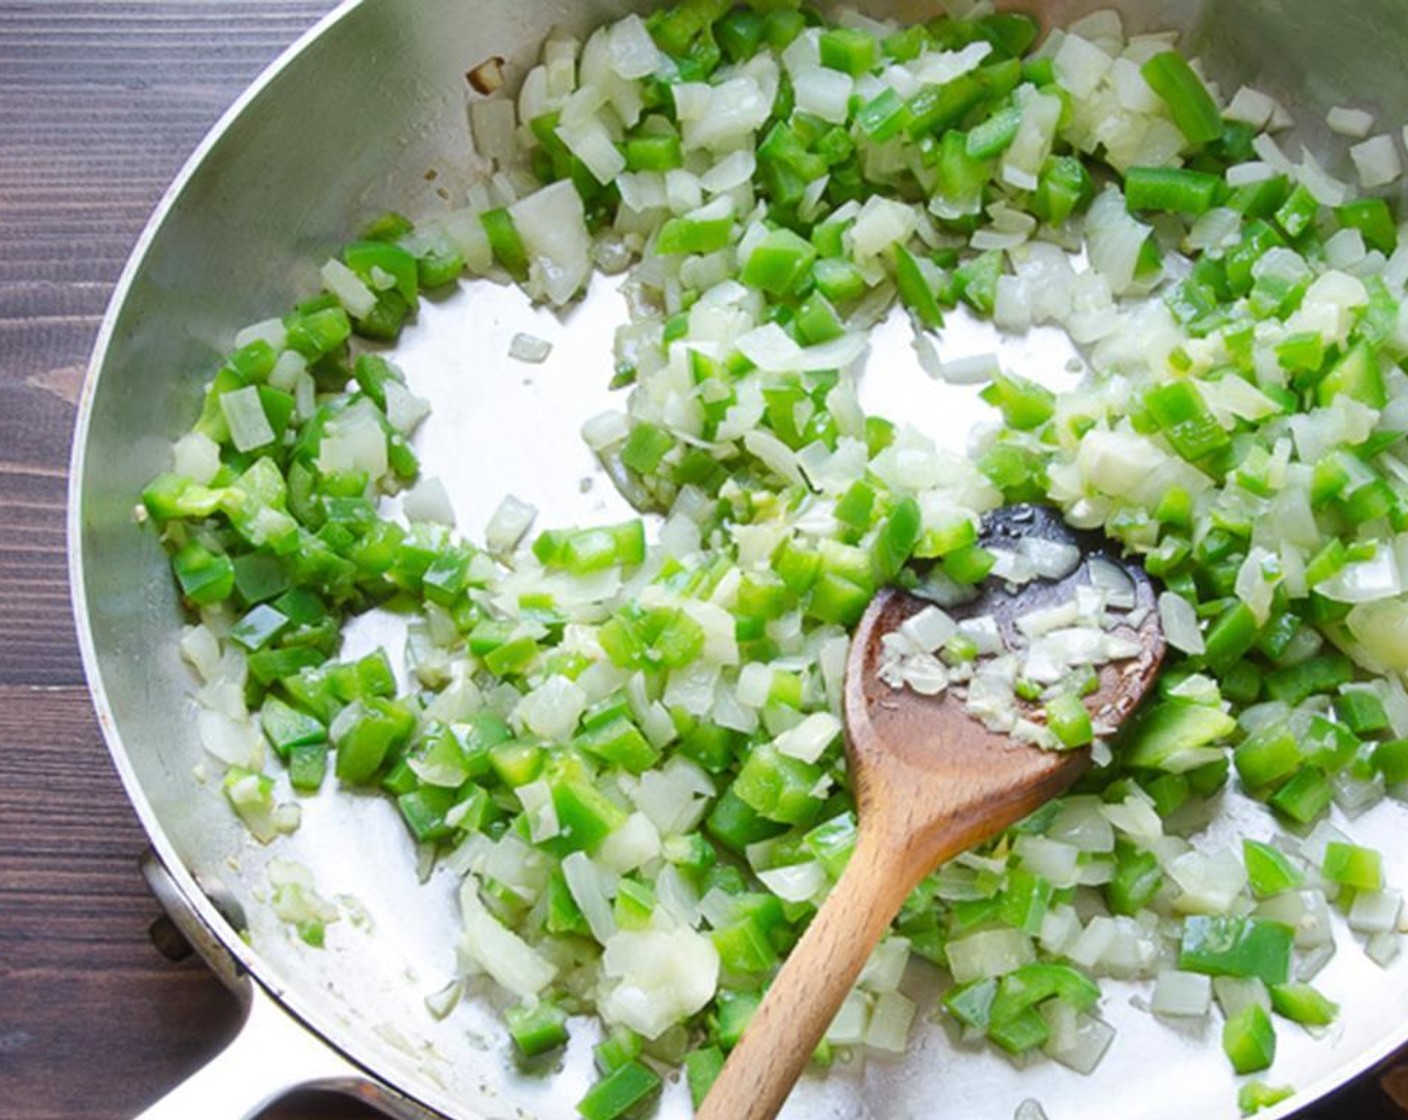 step 6 Chop the Onion (1) and Green Bell Pepper (1). Mince the Garlic (3 cloves). Heat a large skillet over medium high heat. Add the Olive Oil (3 Tbsp), onion, bell pepper and garlic and sauté for 4 to 5 minutes until the vegetables soften.